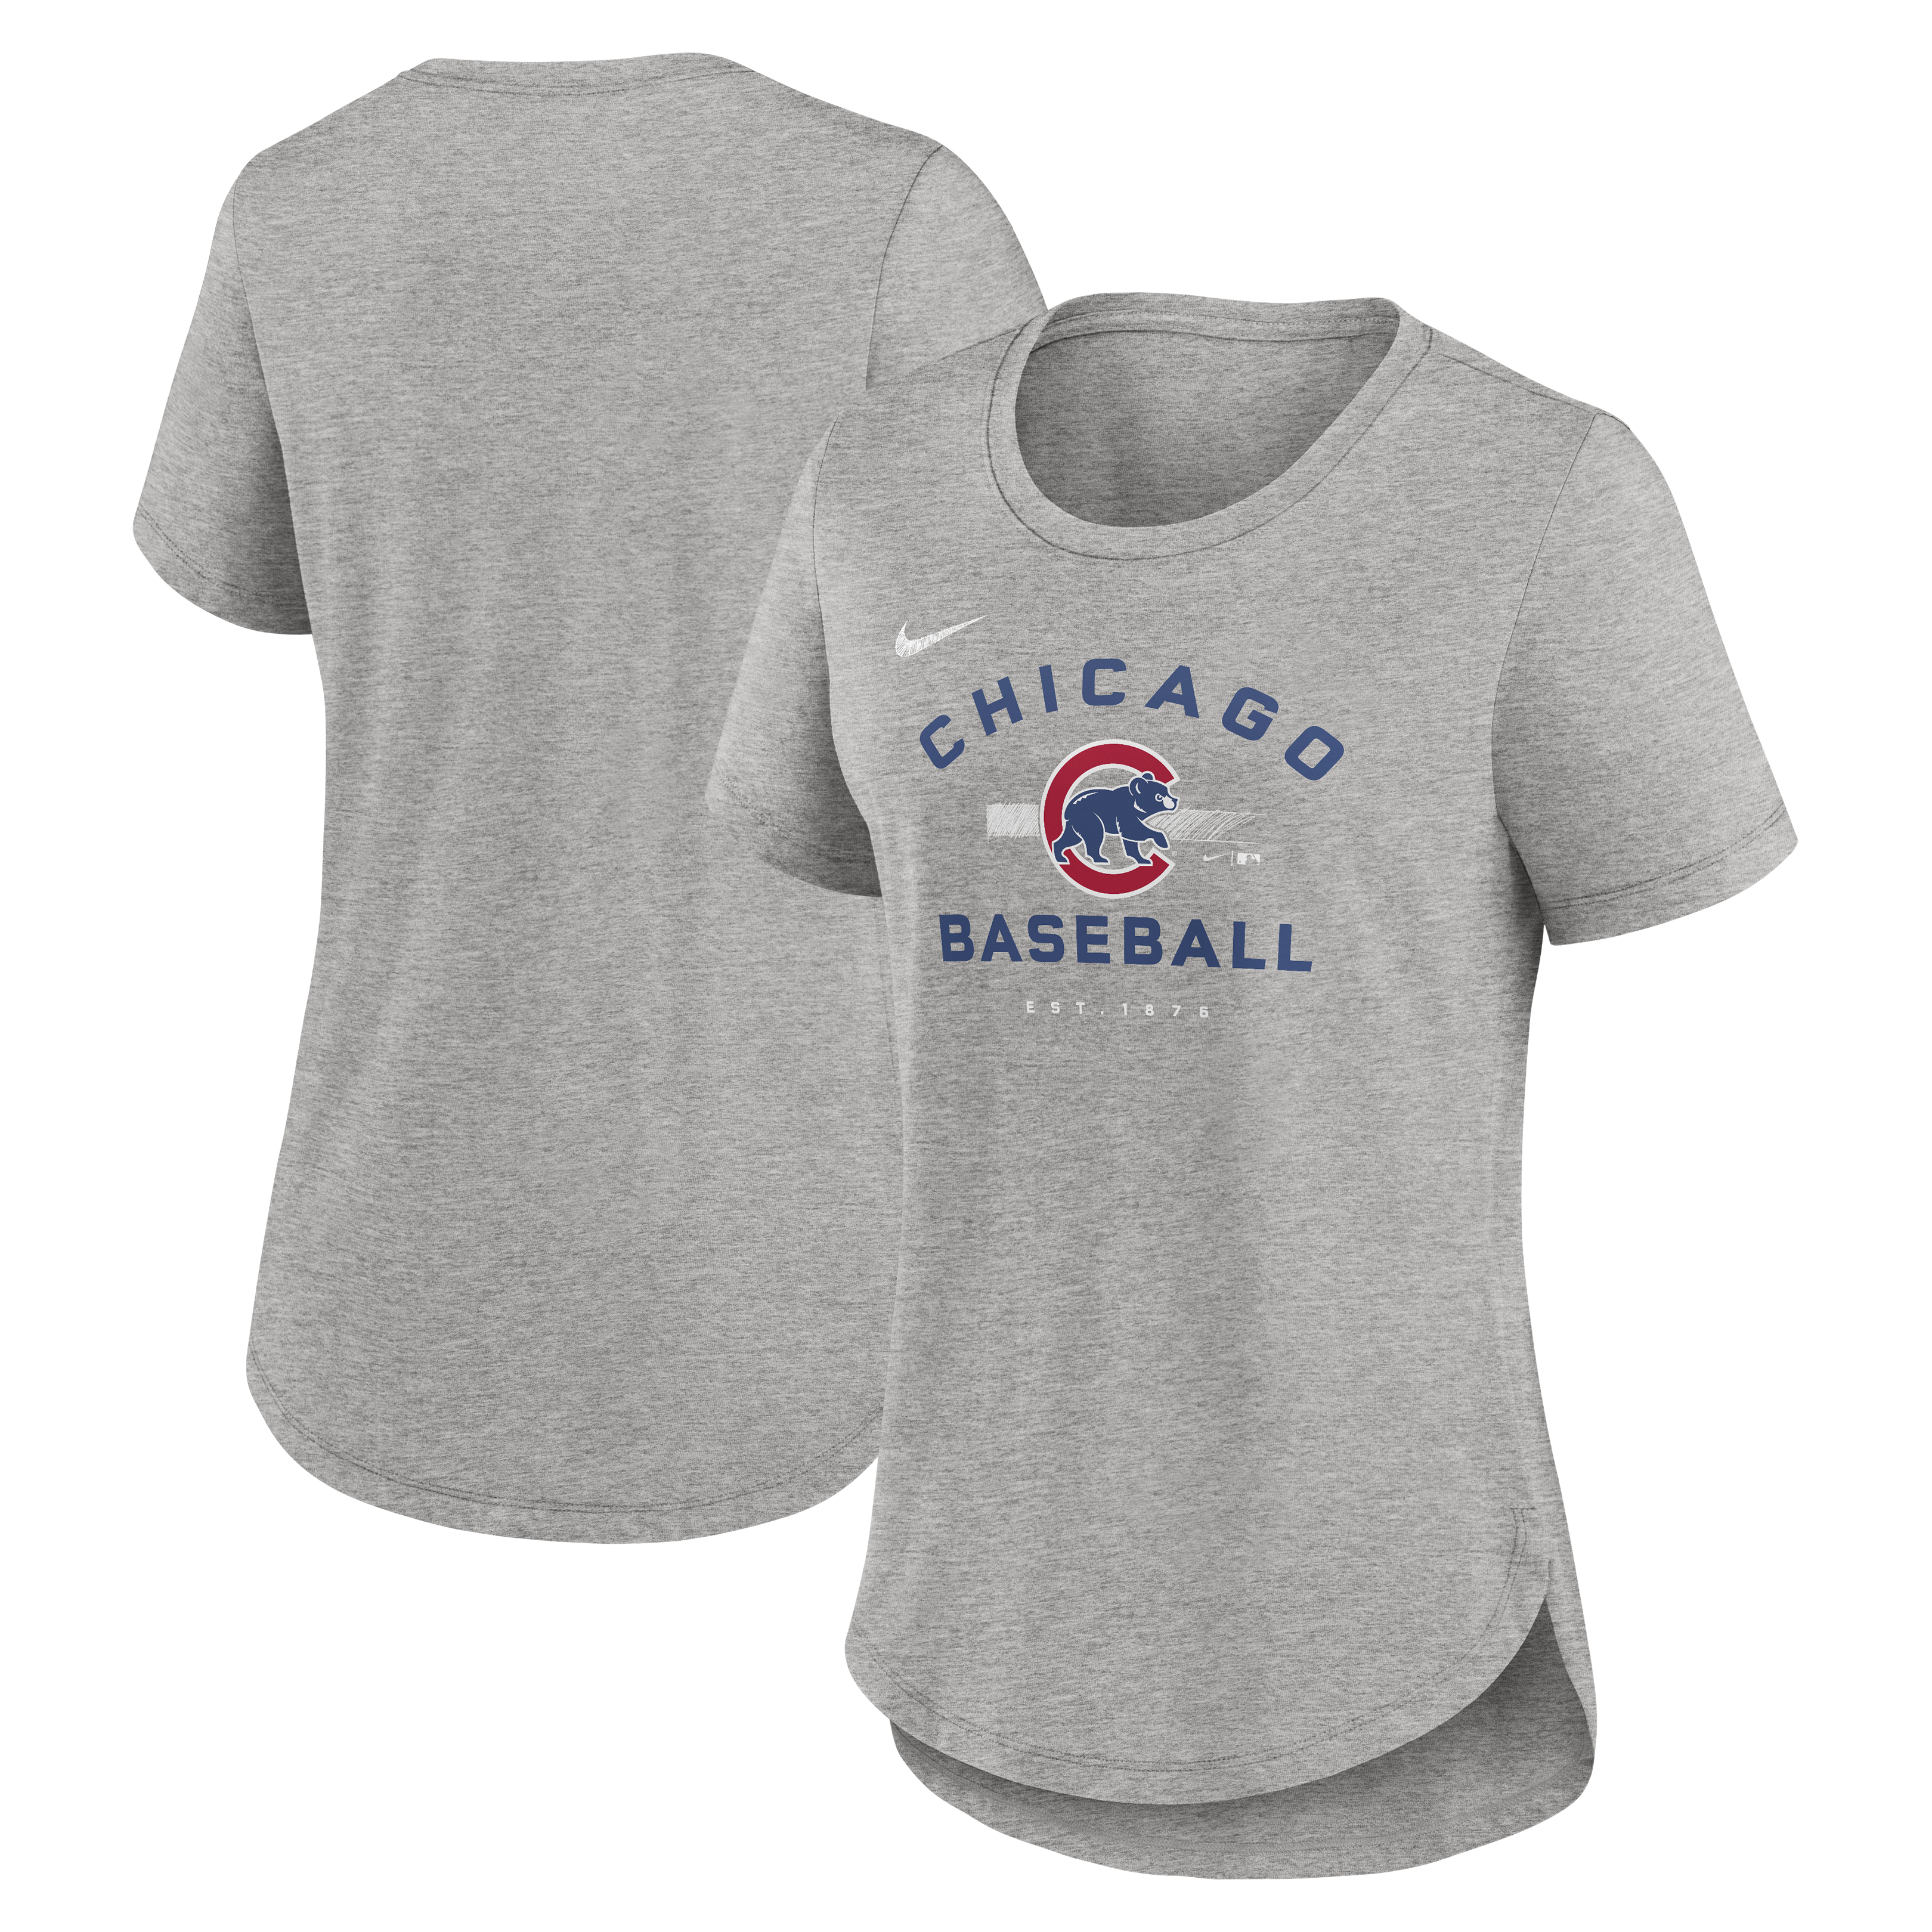 Cubs Woman's Jersey, Authentic Team